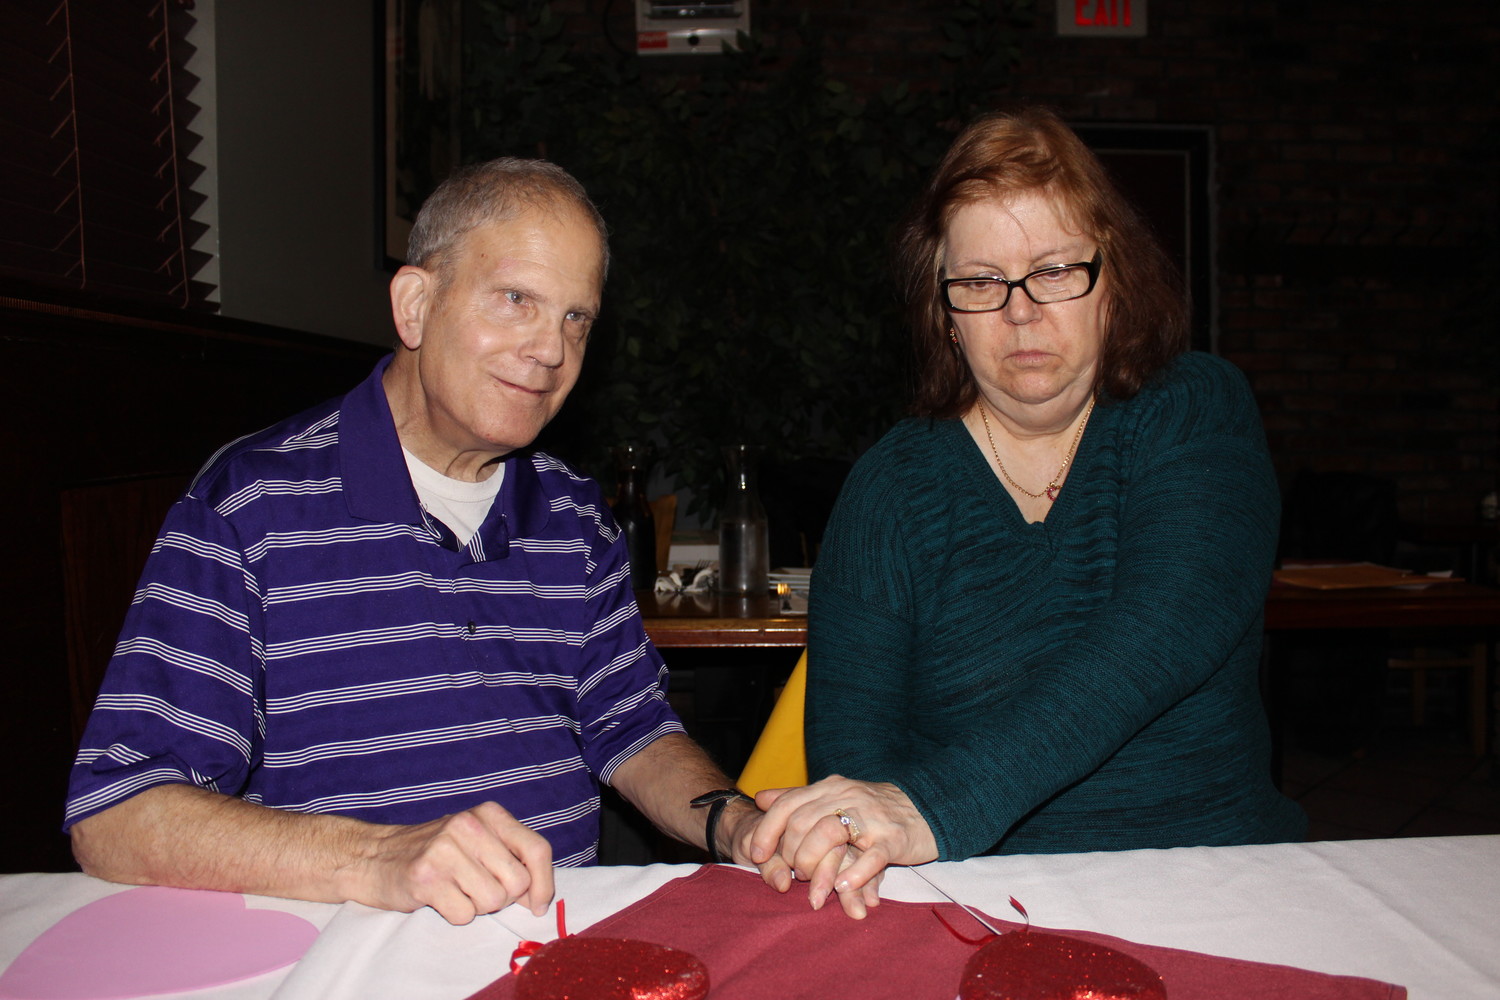 Jeffrey Witt, 70, and his wife Maryann, 68, of Rockville Center, have been together for 22 years.